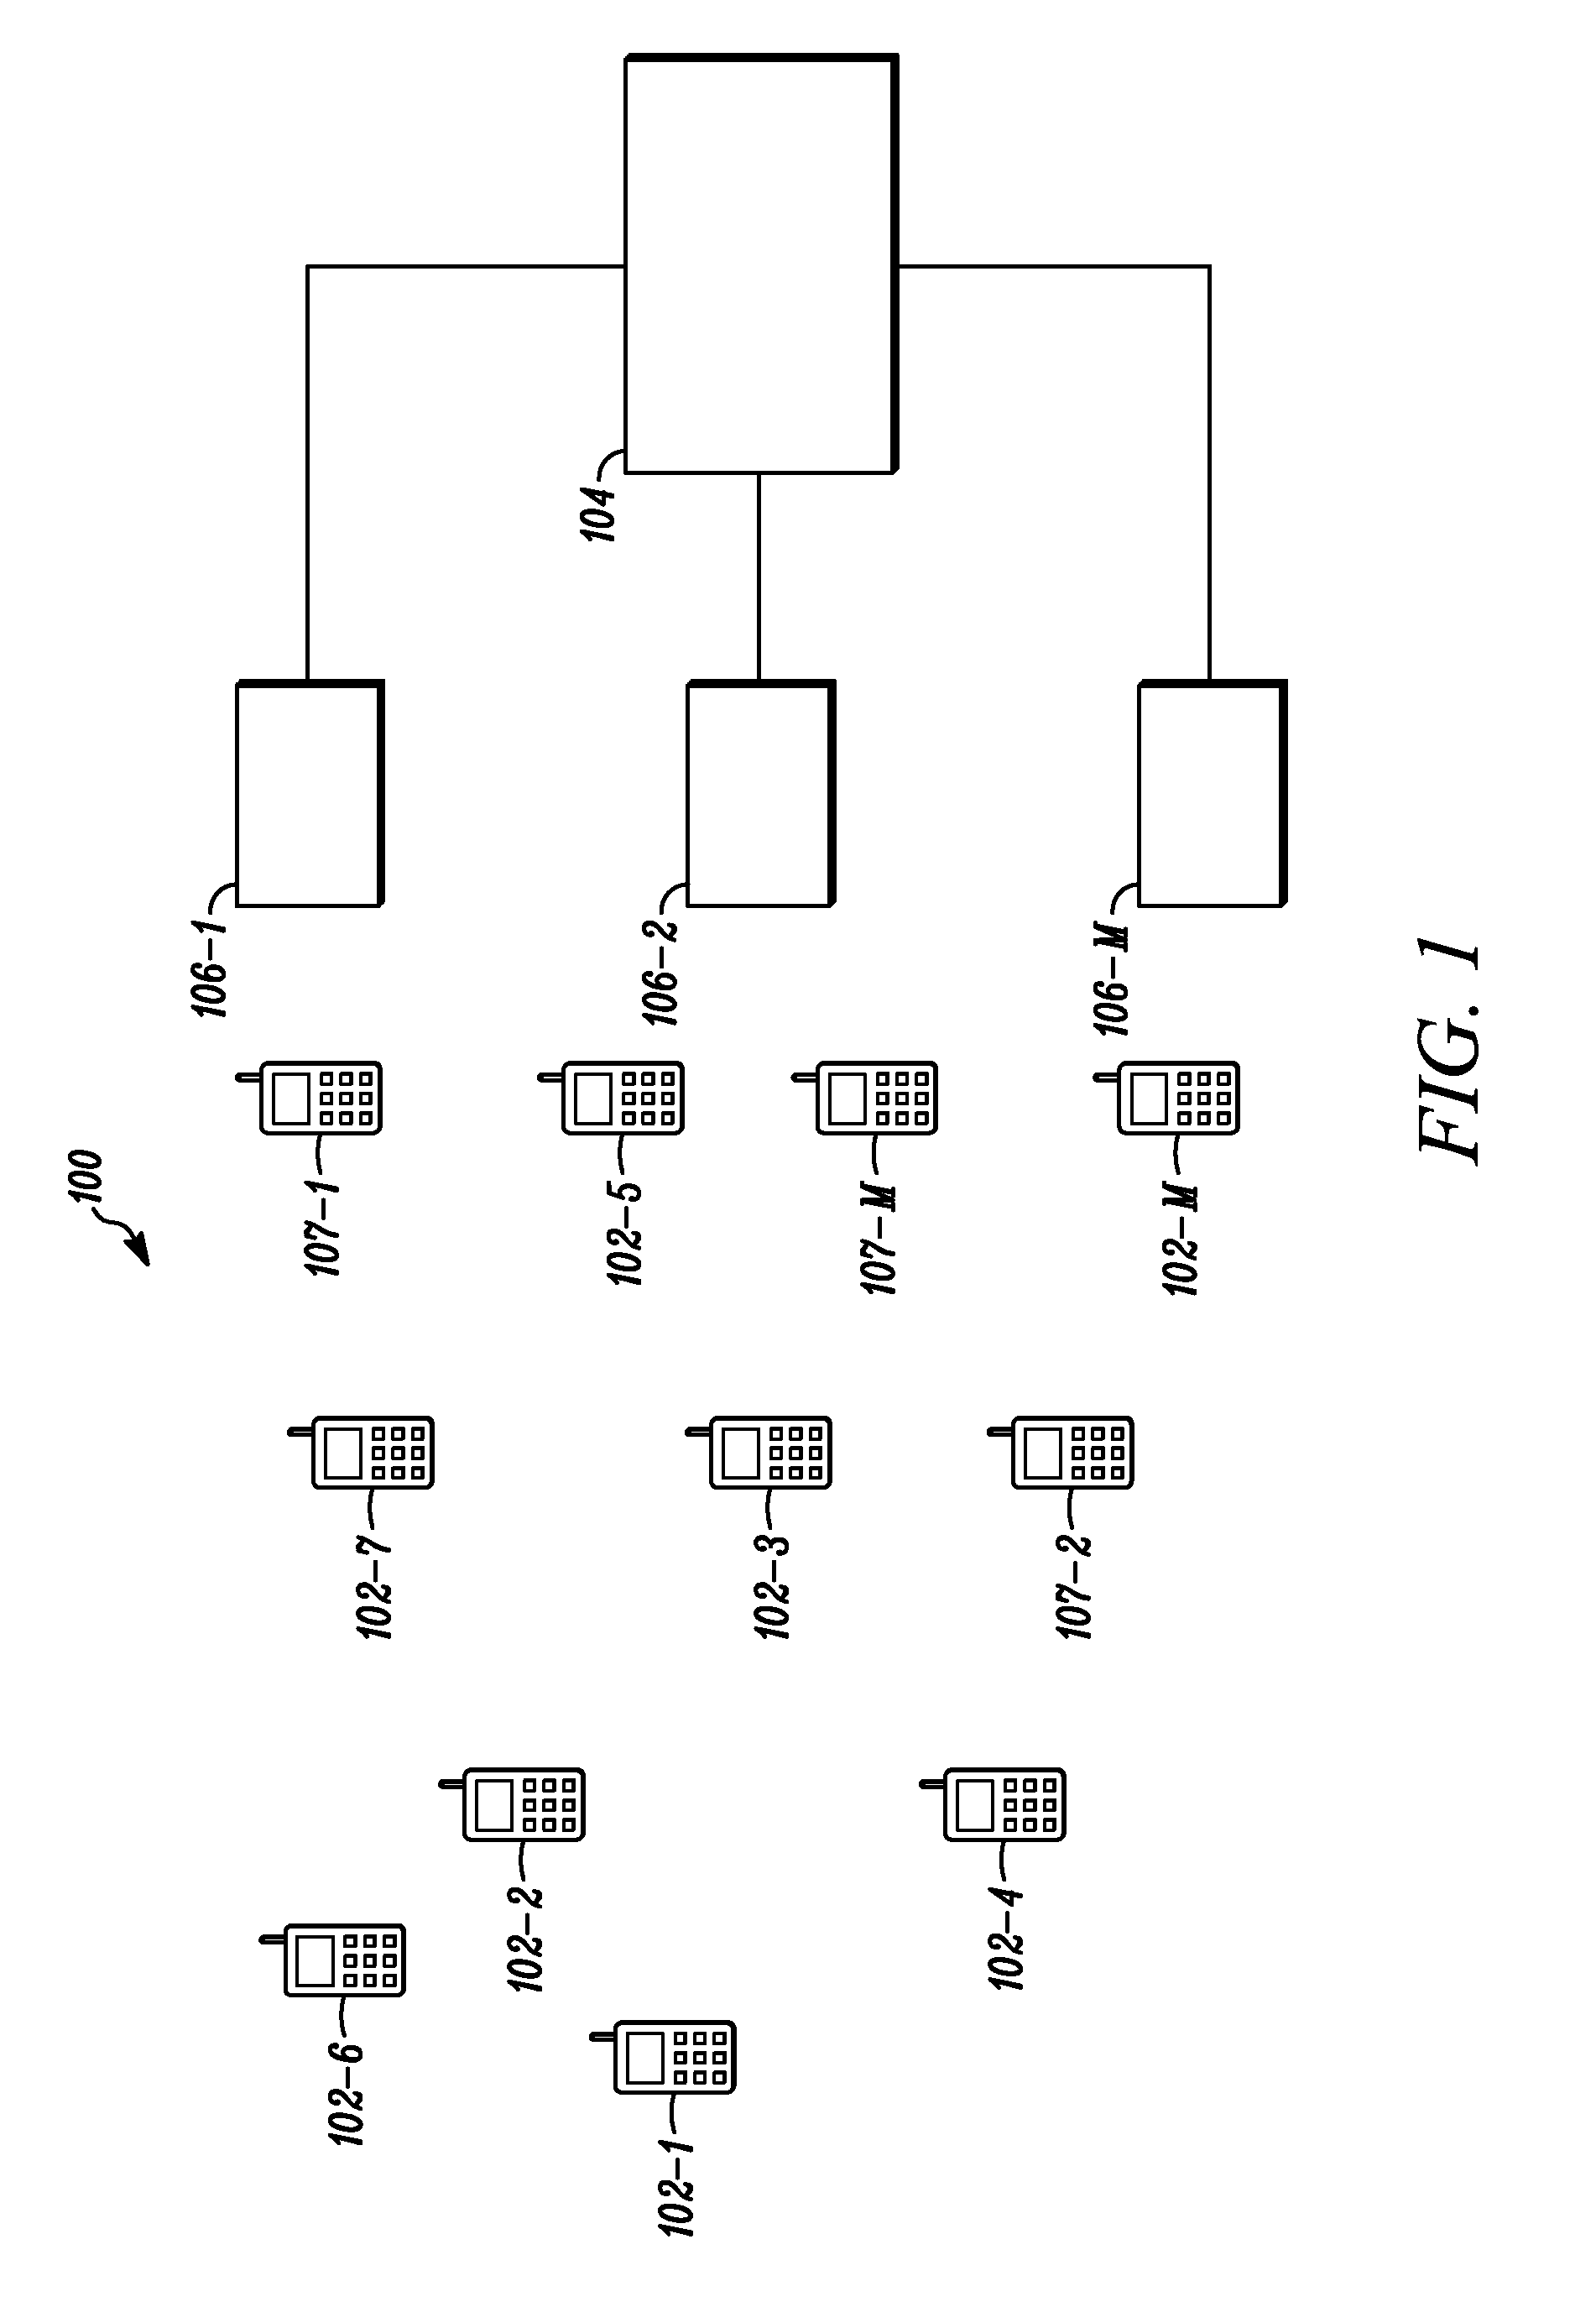 System and method for enabling an access point in an ad-hoc wireless network with fixed wireless routers and wide area network (WAN) access points to identify the location of subscriber device